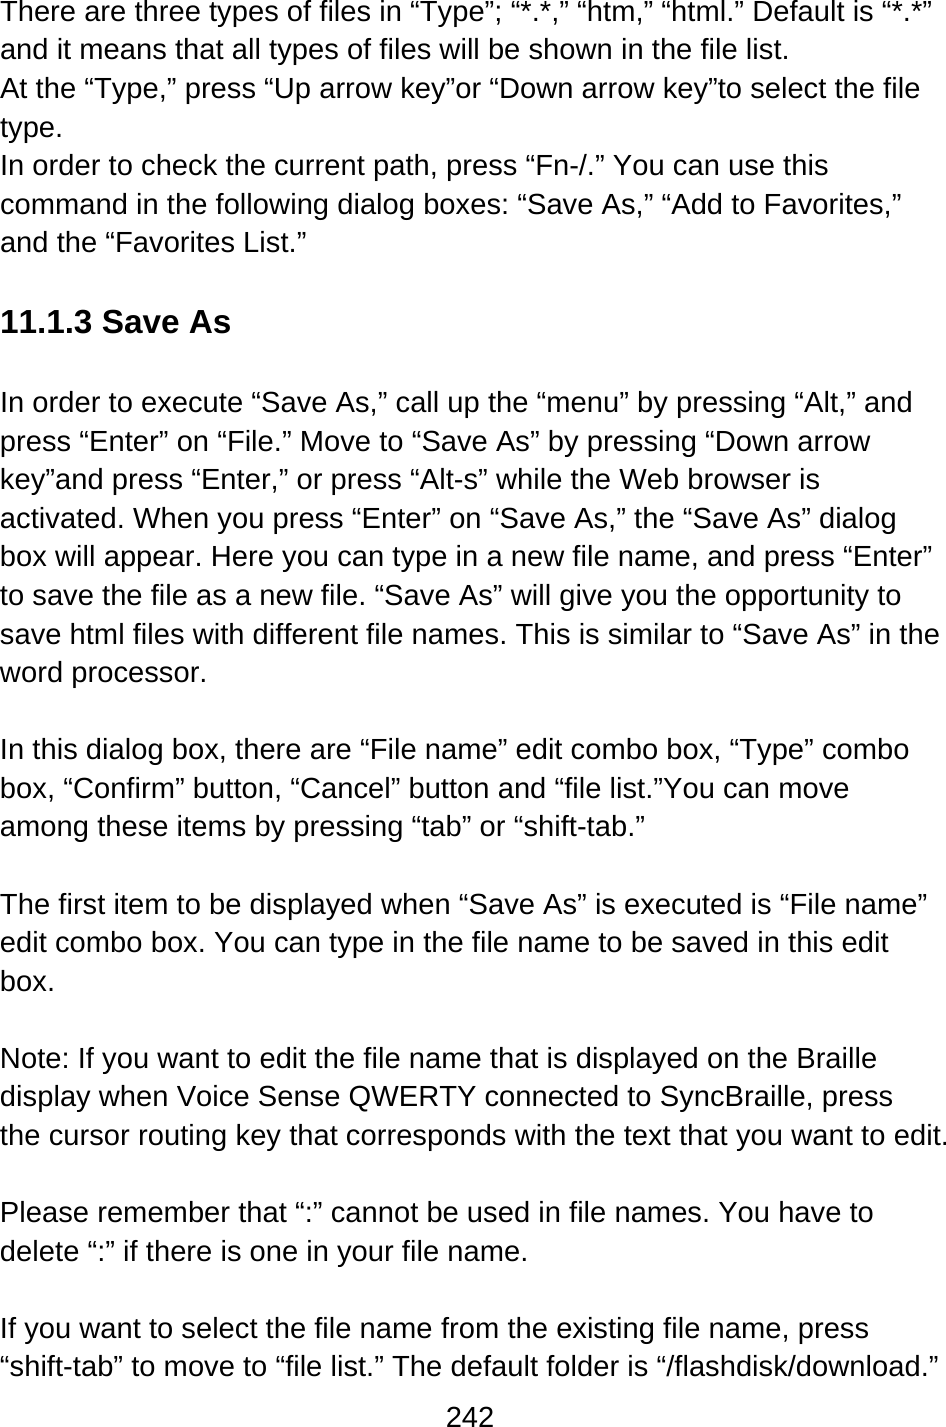 242  There are three types of files in “Type”; “*.*,” “htm,” “html.” Default is “*.*” and it means that all types of files will be shown in the file list. At the “Type,” press “Up arrow key”or “Down arrow key”to select the file type. In order to check the current path, press “Fn-/.” You can use this command in the following dialog boxes: “Save As,” “Add to Favorites,” and the “Favorites List.”  11.1.3 Save As  In order to execute “Save As,” call up the “menu” by pressing “Alt,” and press “Enter” on “File.” Move to “Save As” by pressing “Down arrow key”and press “Enter,” or press “Alt-s” while the Web browser is activated. When you press “Enter” on “Save As,” the “Save As” dialog box will appear. Here you can type in a new file name, and press “Enter” to save the file as a new file. “Save As” will give you the opportunity to save html files with different file names. This is similar to “Save As” in the word processor.  In this dialog box, there are “File name” edit combo box, “Type” combo box, “Confirm” button, “Cancel” button and “file list.”You can move among these items by pressing “tab” or “shift-tab.”  The first item to be displayed when “Save As” is executed is “File name” edit combo box. You can type in the file name to be saved in this edit box.  Note: If you want to edit the file name that is displayed on the Braille display when Voice Sense QWERTY connected to SyncBraille, press the cursor routing key that corresponds with the text that you want to edit.    Please remember that “:” cannot be used in file names. You have to delete “:” if there is one in your file name.  If you want to select the file name from the existing file name, press “shift-tab” to move to “file list.” The default folder is “/flashdisk/download.” 